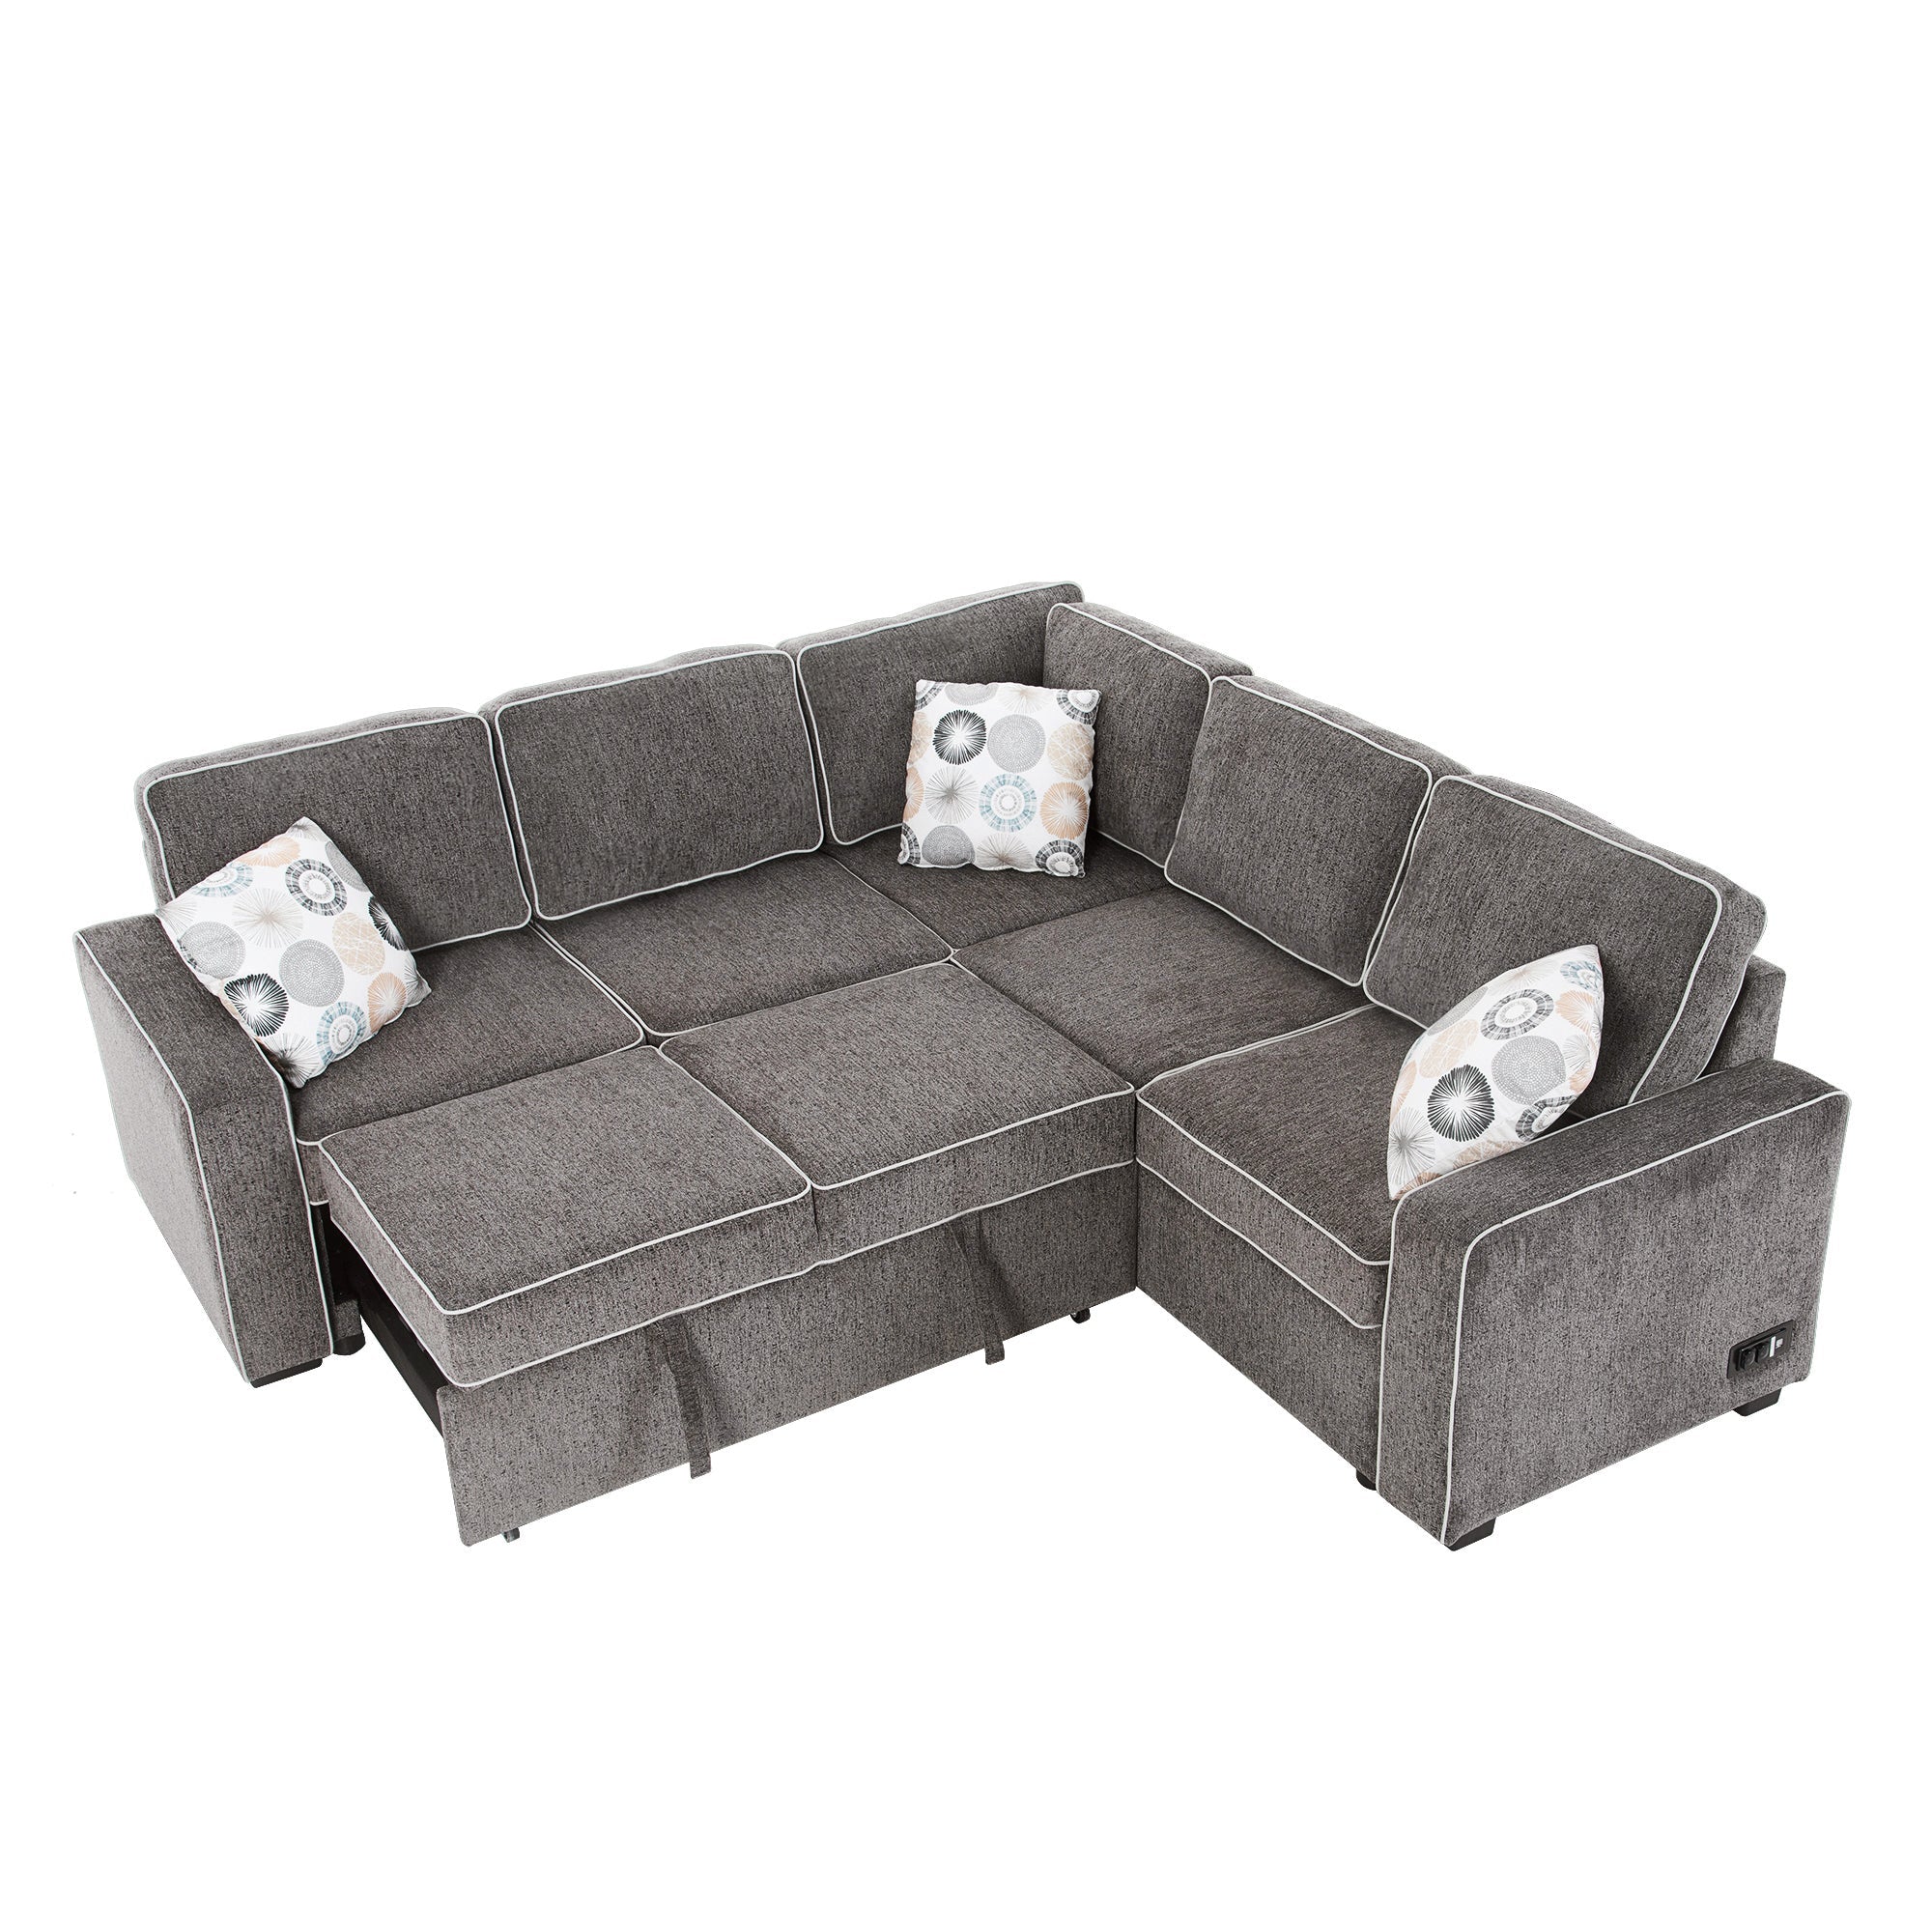 Brown 83" L-Shaped Linen Sleeper Sectional Sofa Bed with USB Charging-Sleeper Sectionals-American Furniture Outlet